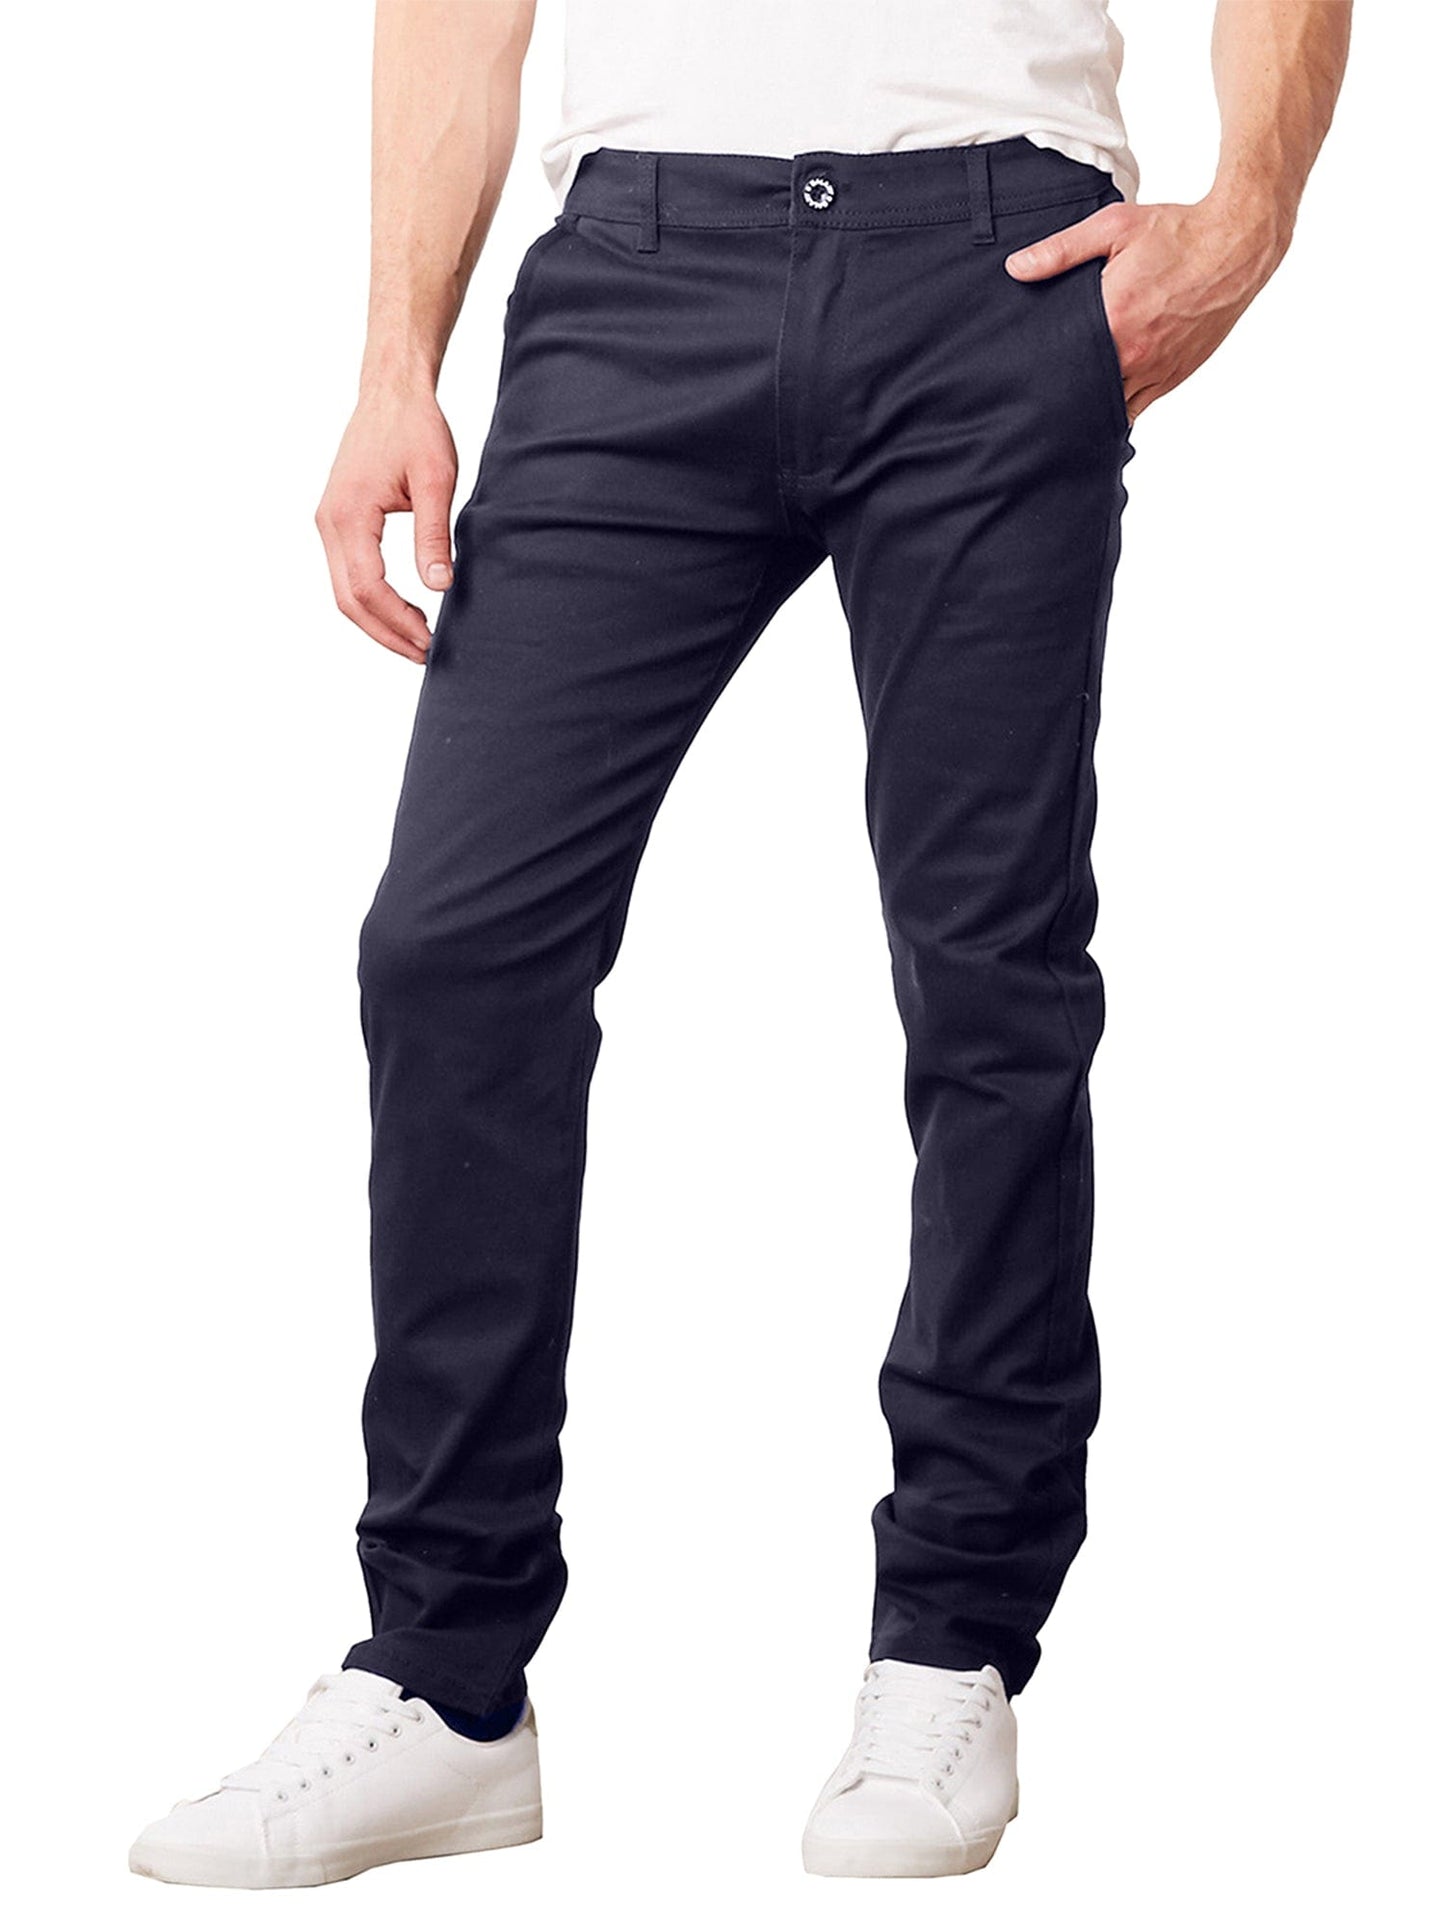 Men's Super Stretch Slim Fit Everyday Chino Pants (Sizes, 30-42)